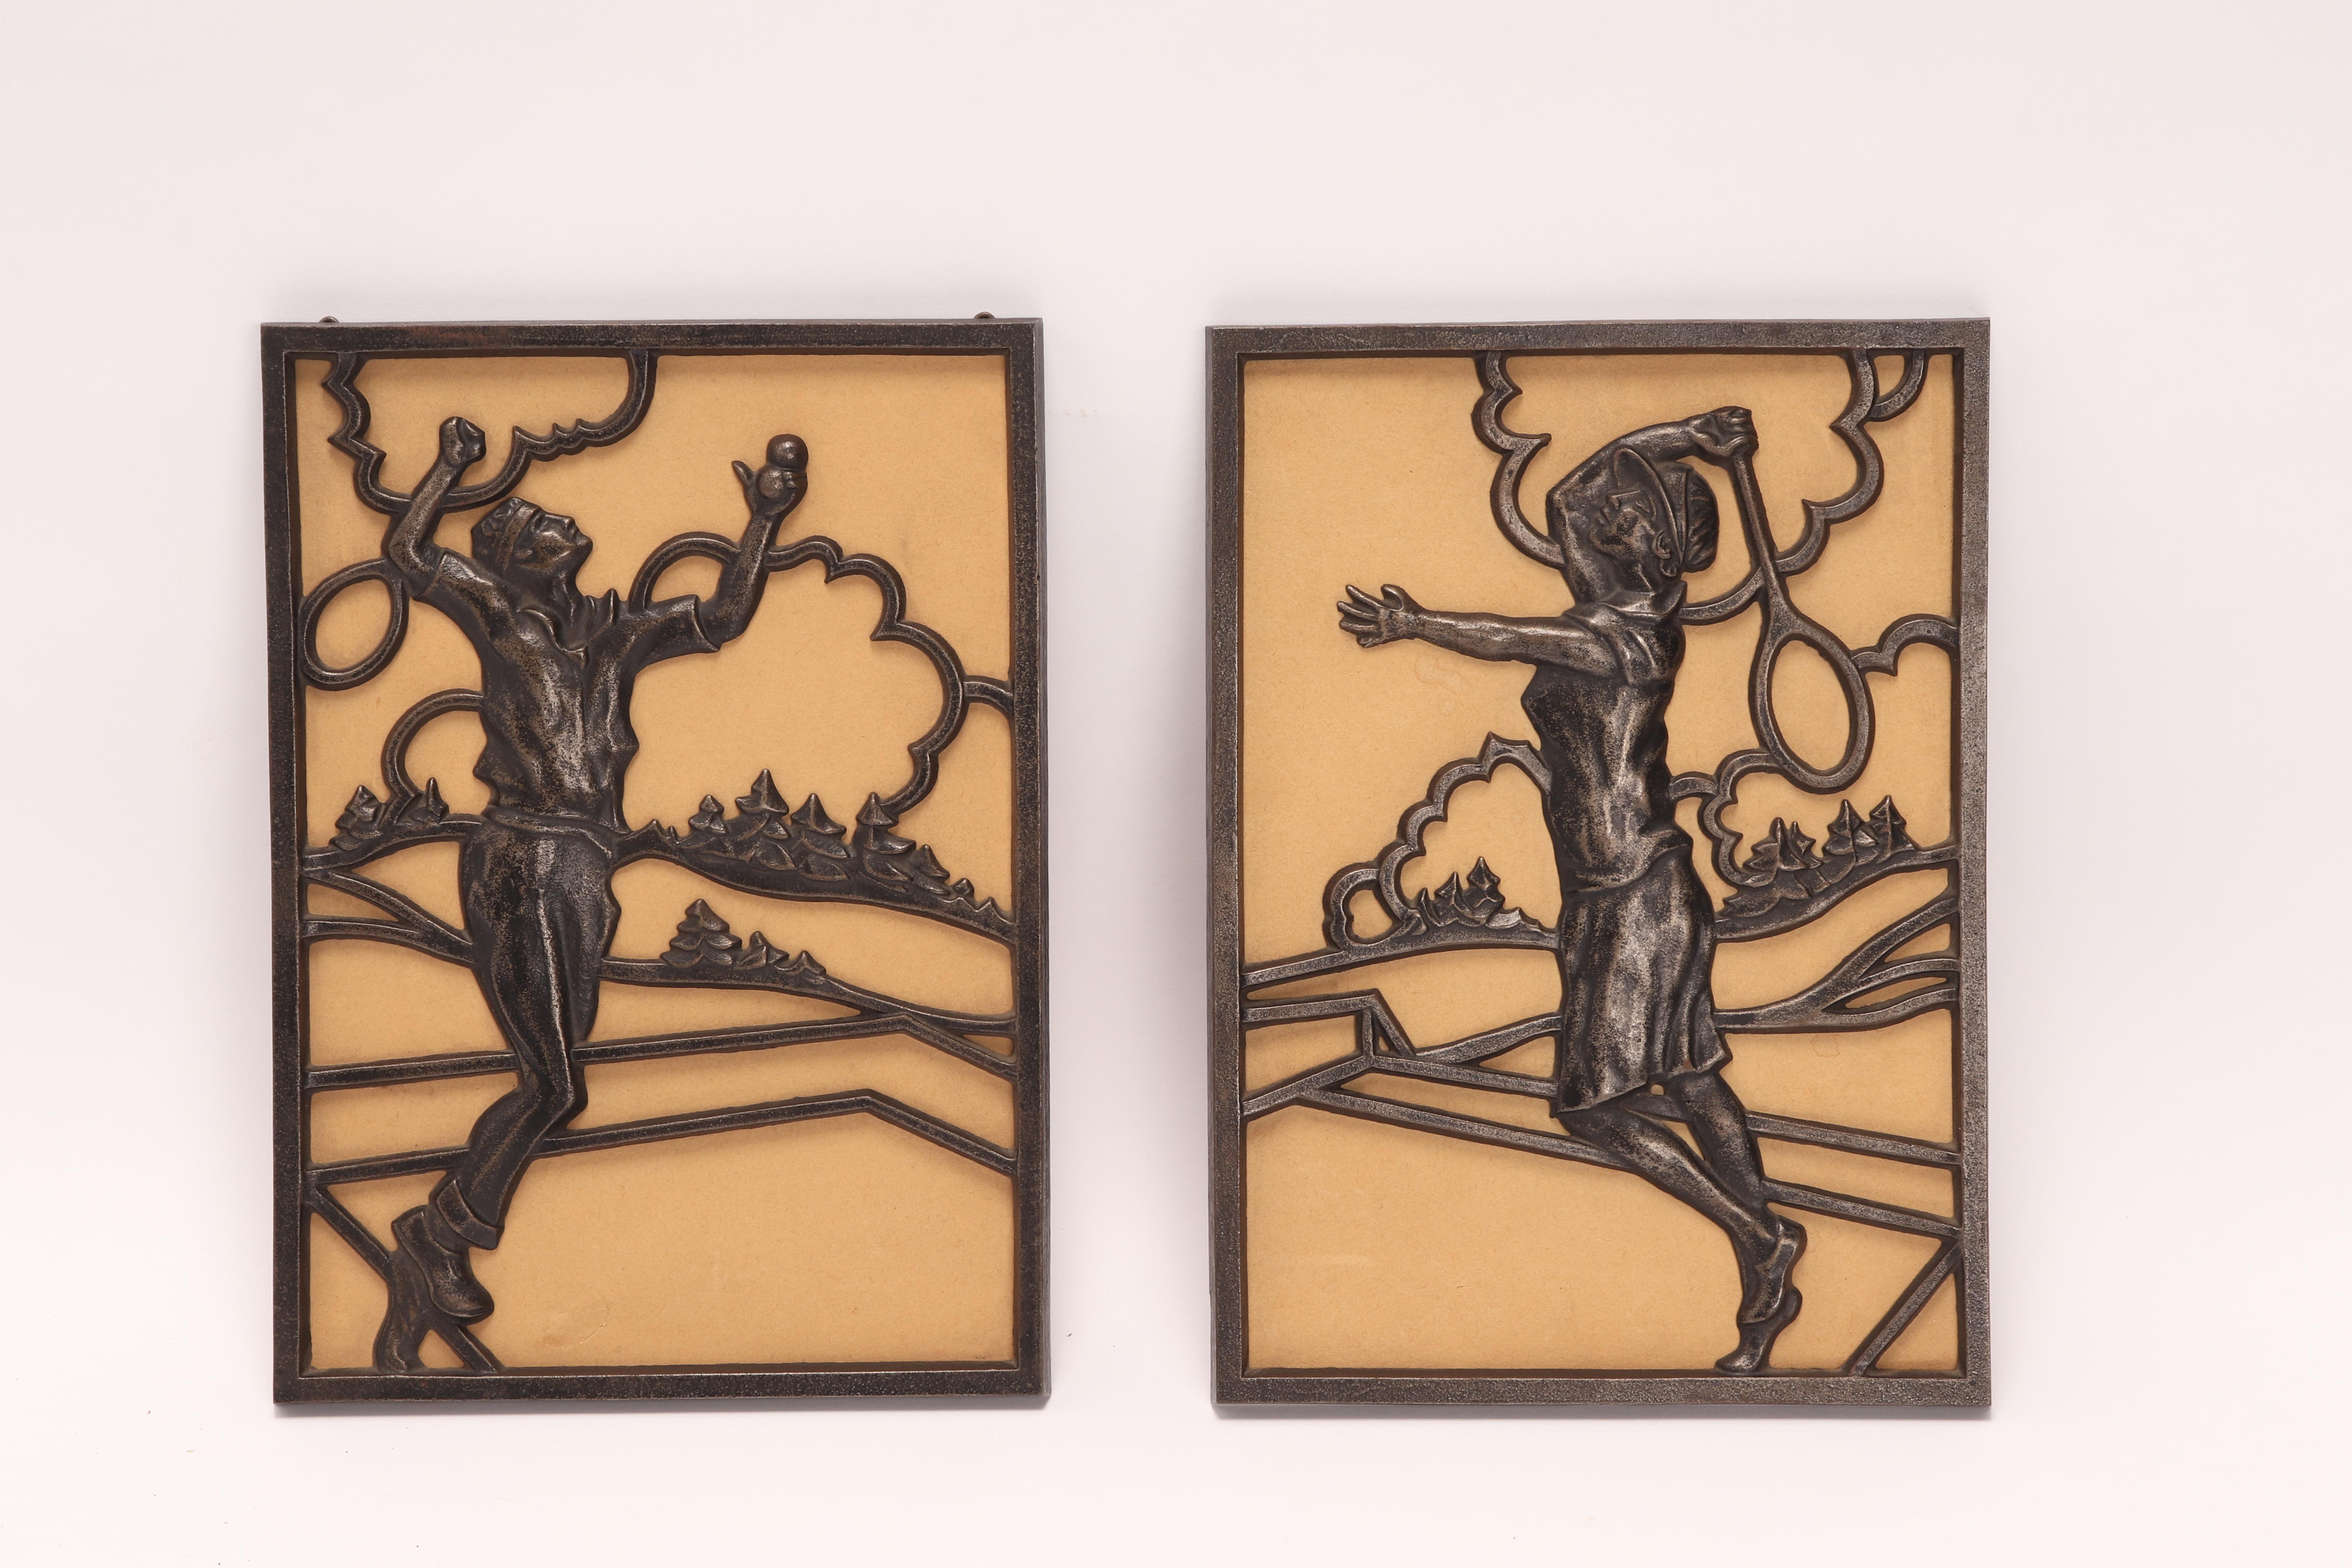 Pair of bronze plates, rectangular shape, openwork, depicting two tennis players, a man, and a woman, with pine trees and clouds in the background. Austria 1930 ca.
 